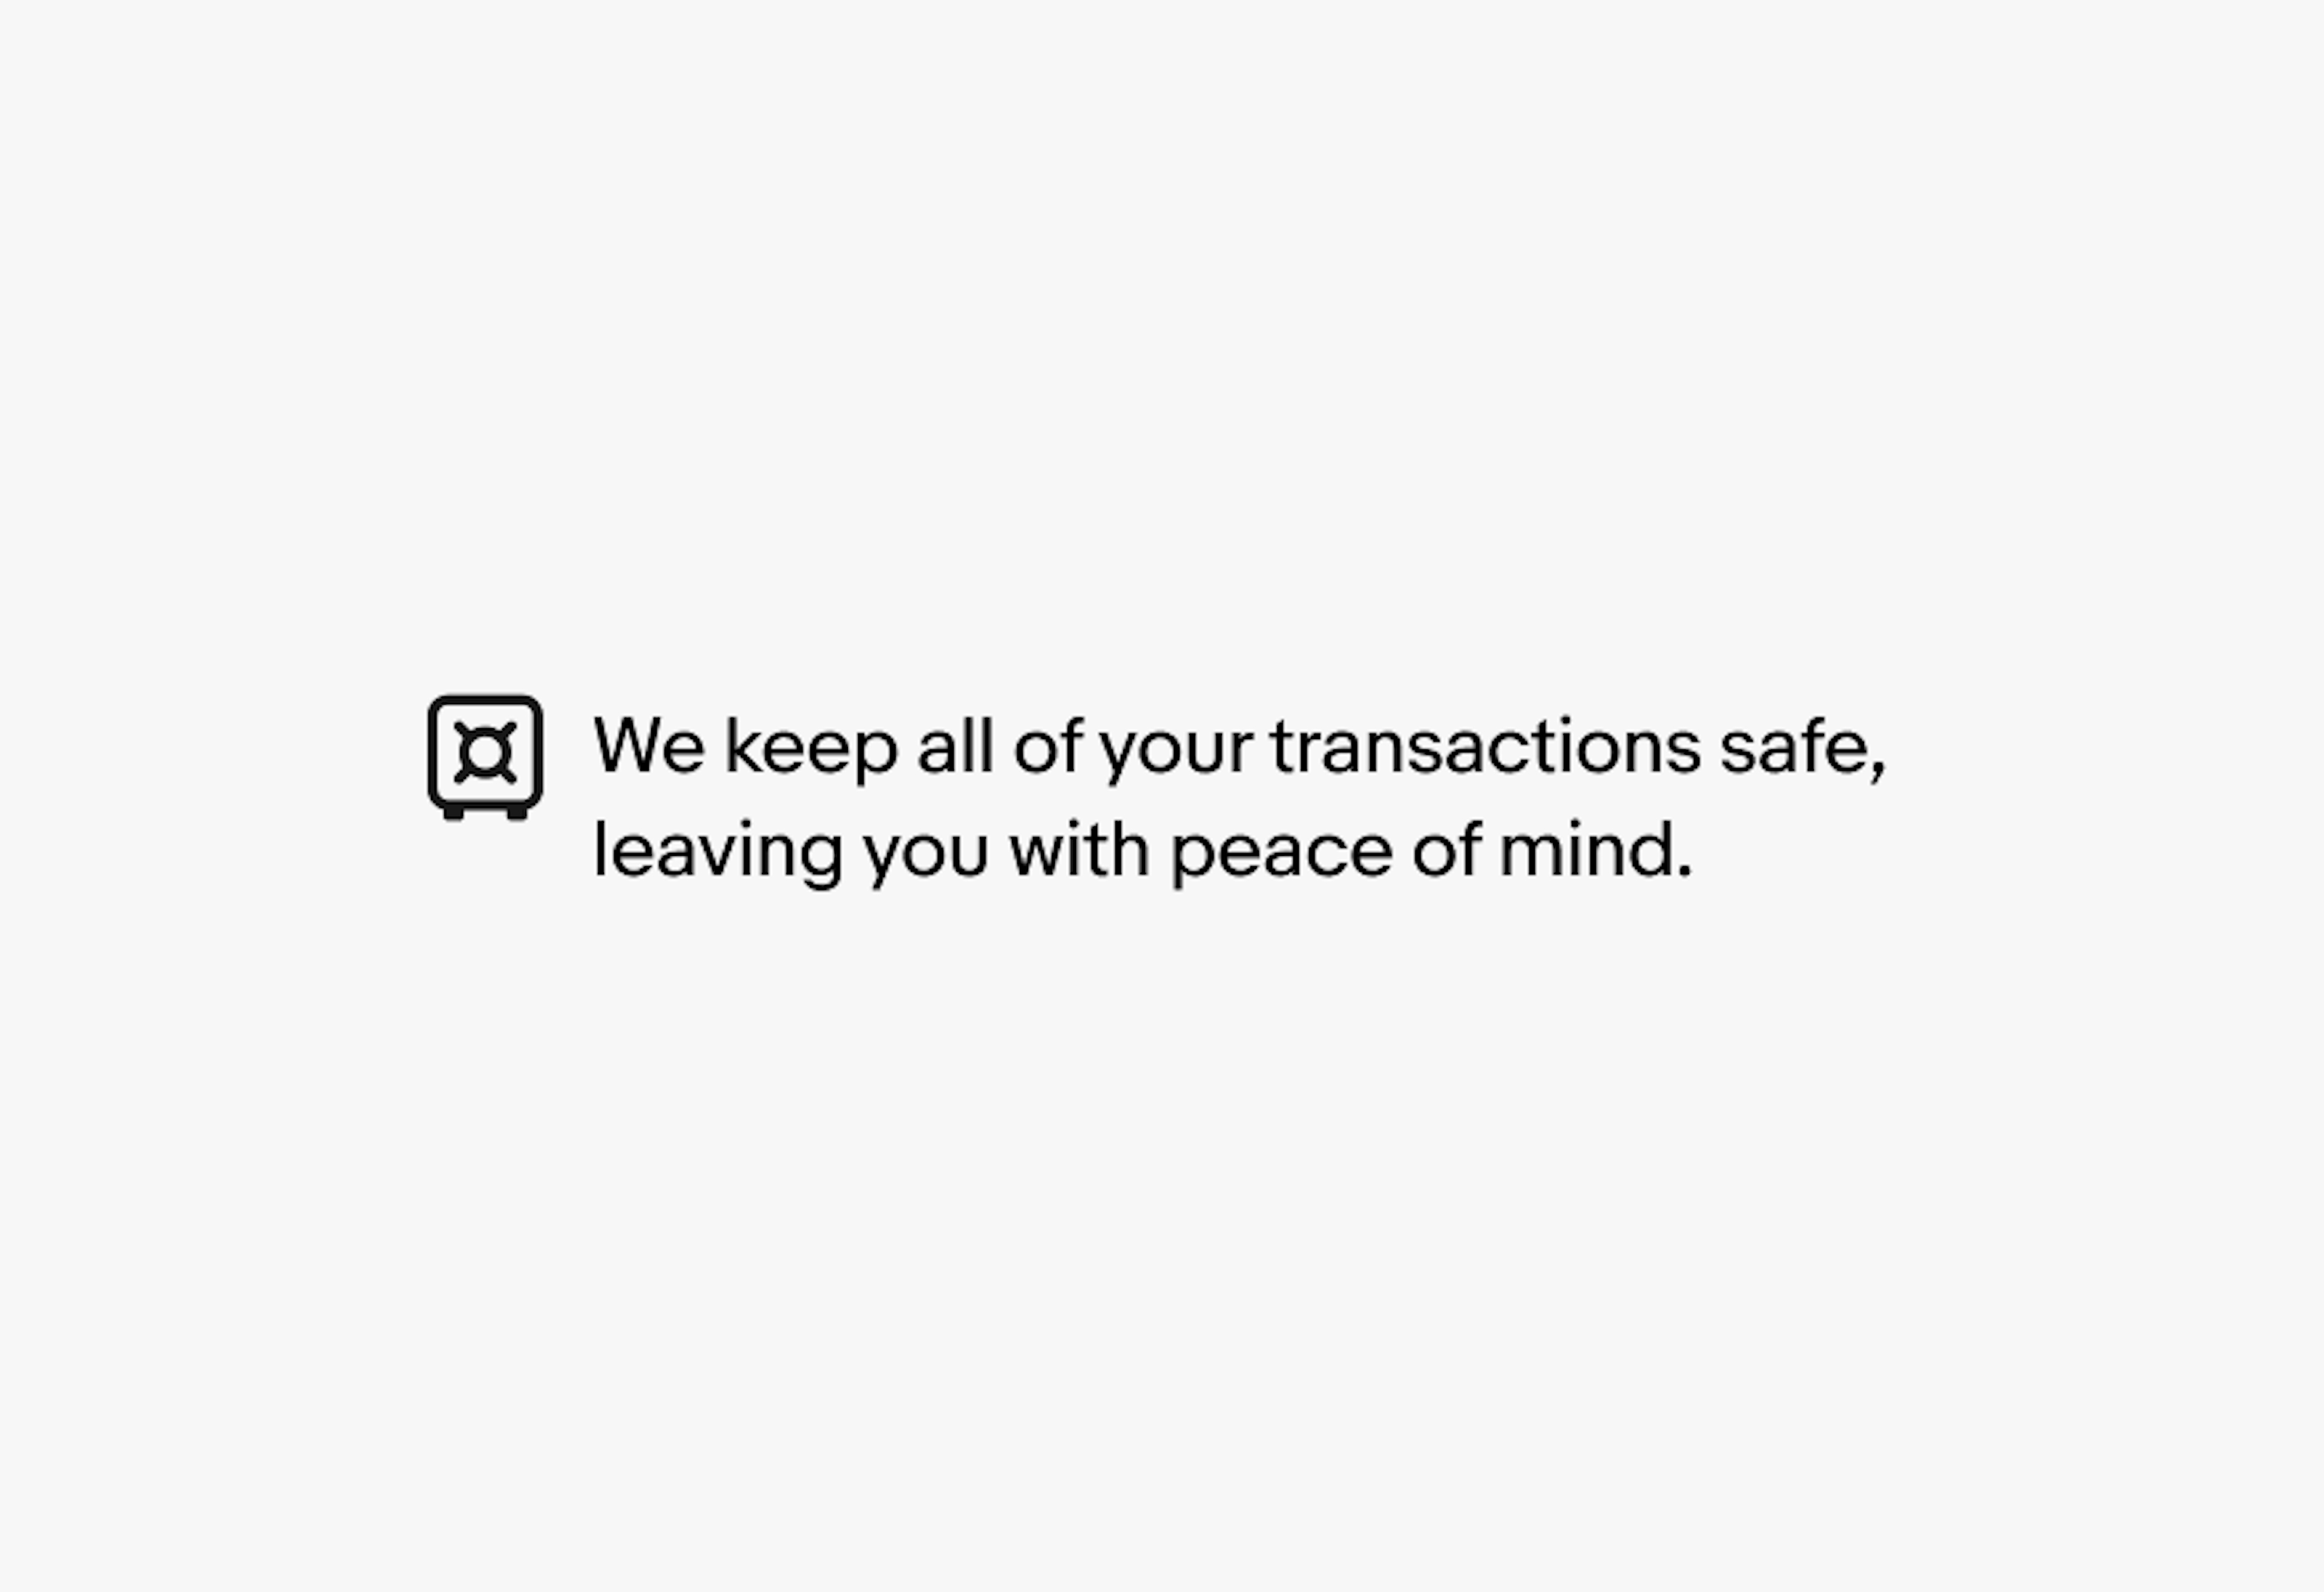 A vault icon next to text that describes transactions and peace of mind.